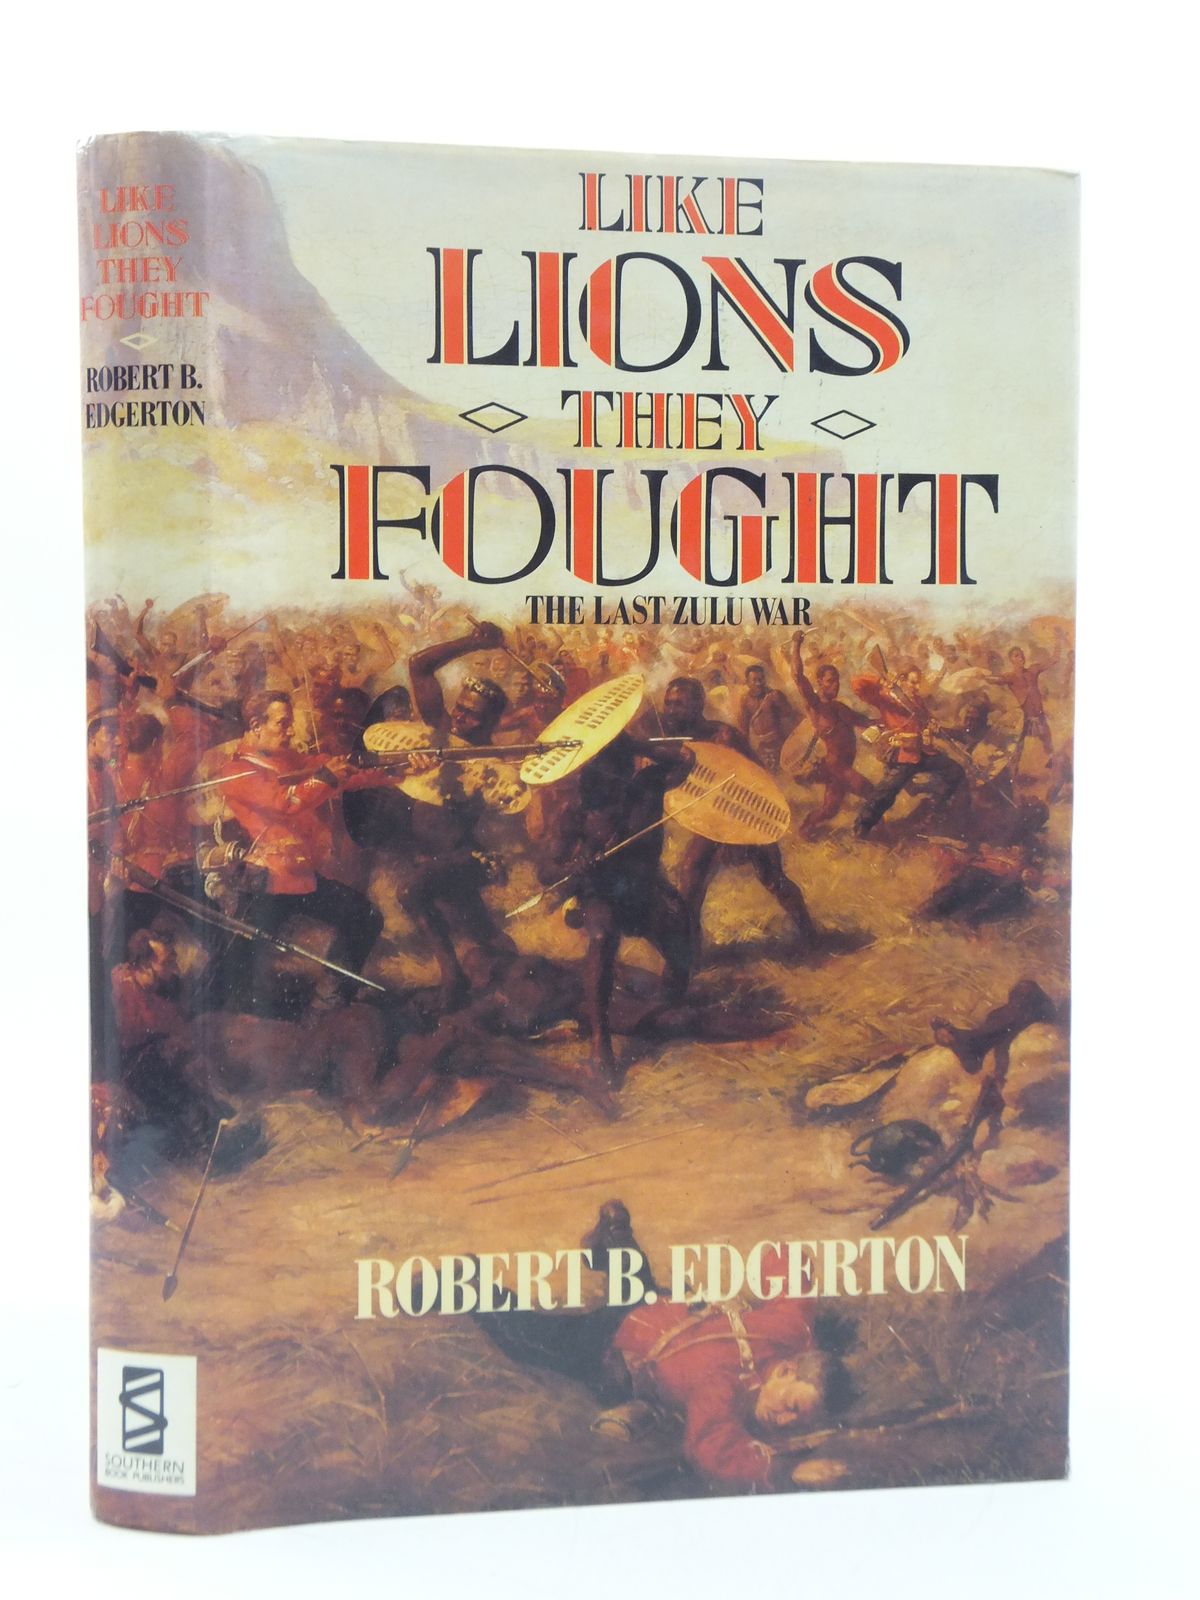 Photo of LIKE LIONS THEY FOUGHT written by Edgerton, Robert B. published by Southern Book Publishers (STOCK CODE: 1605330)  for sale by Stella & Rose's Books